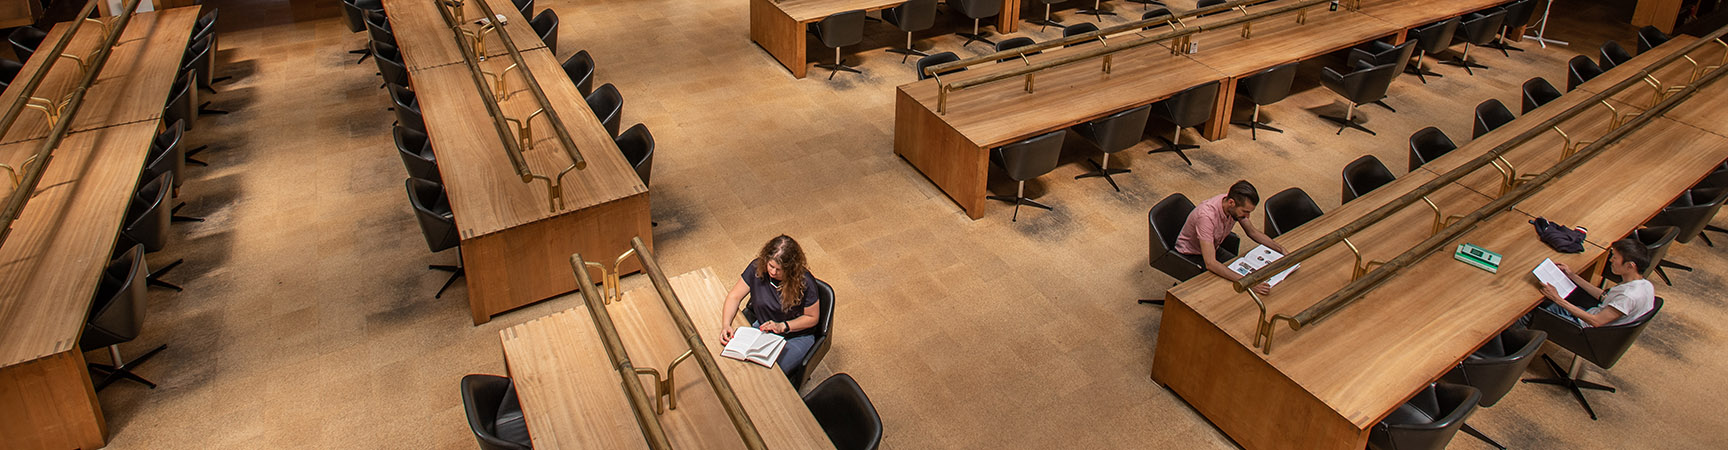 A birdseye view six long wooden desks, four students are scattered around reading at them